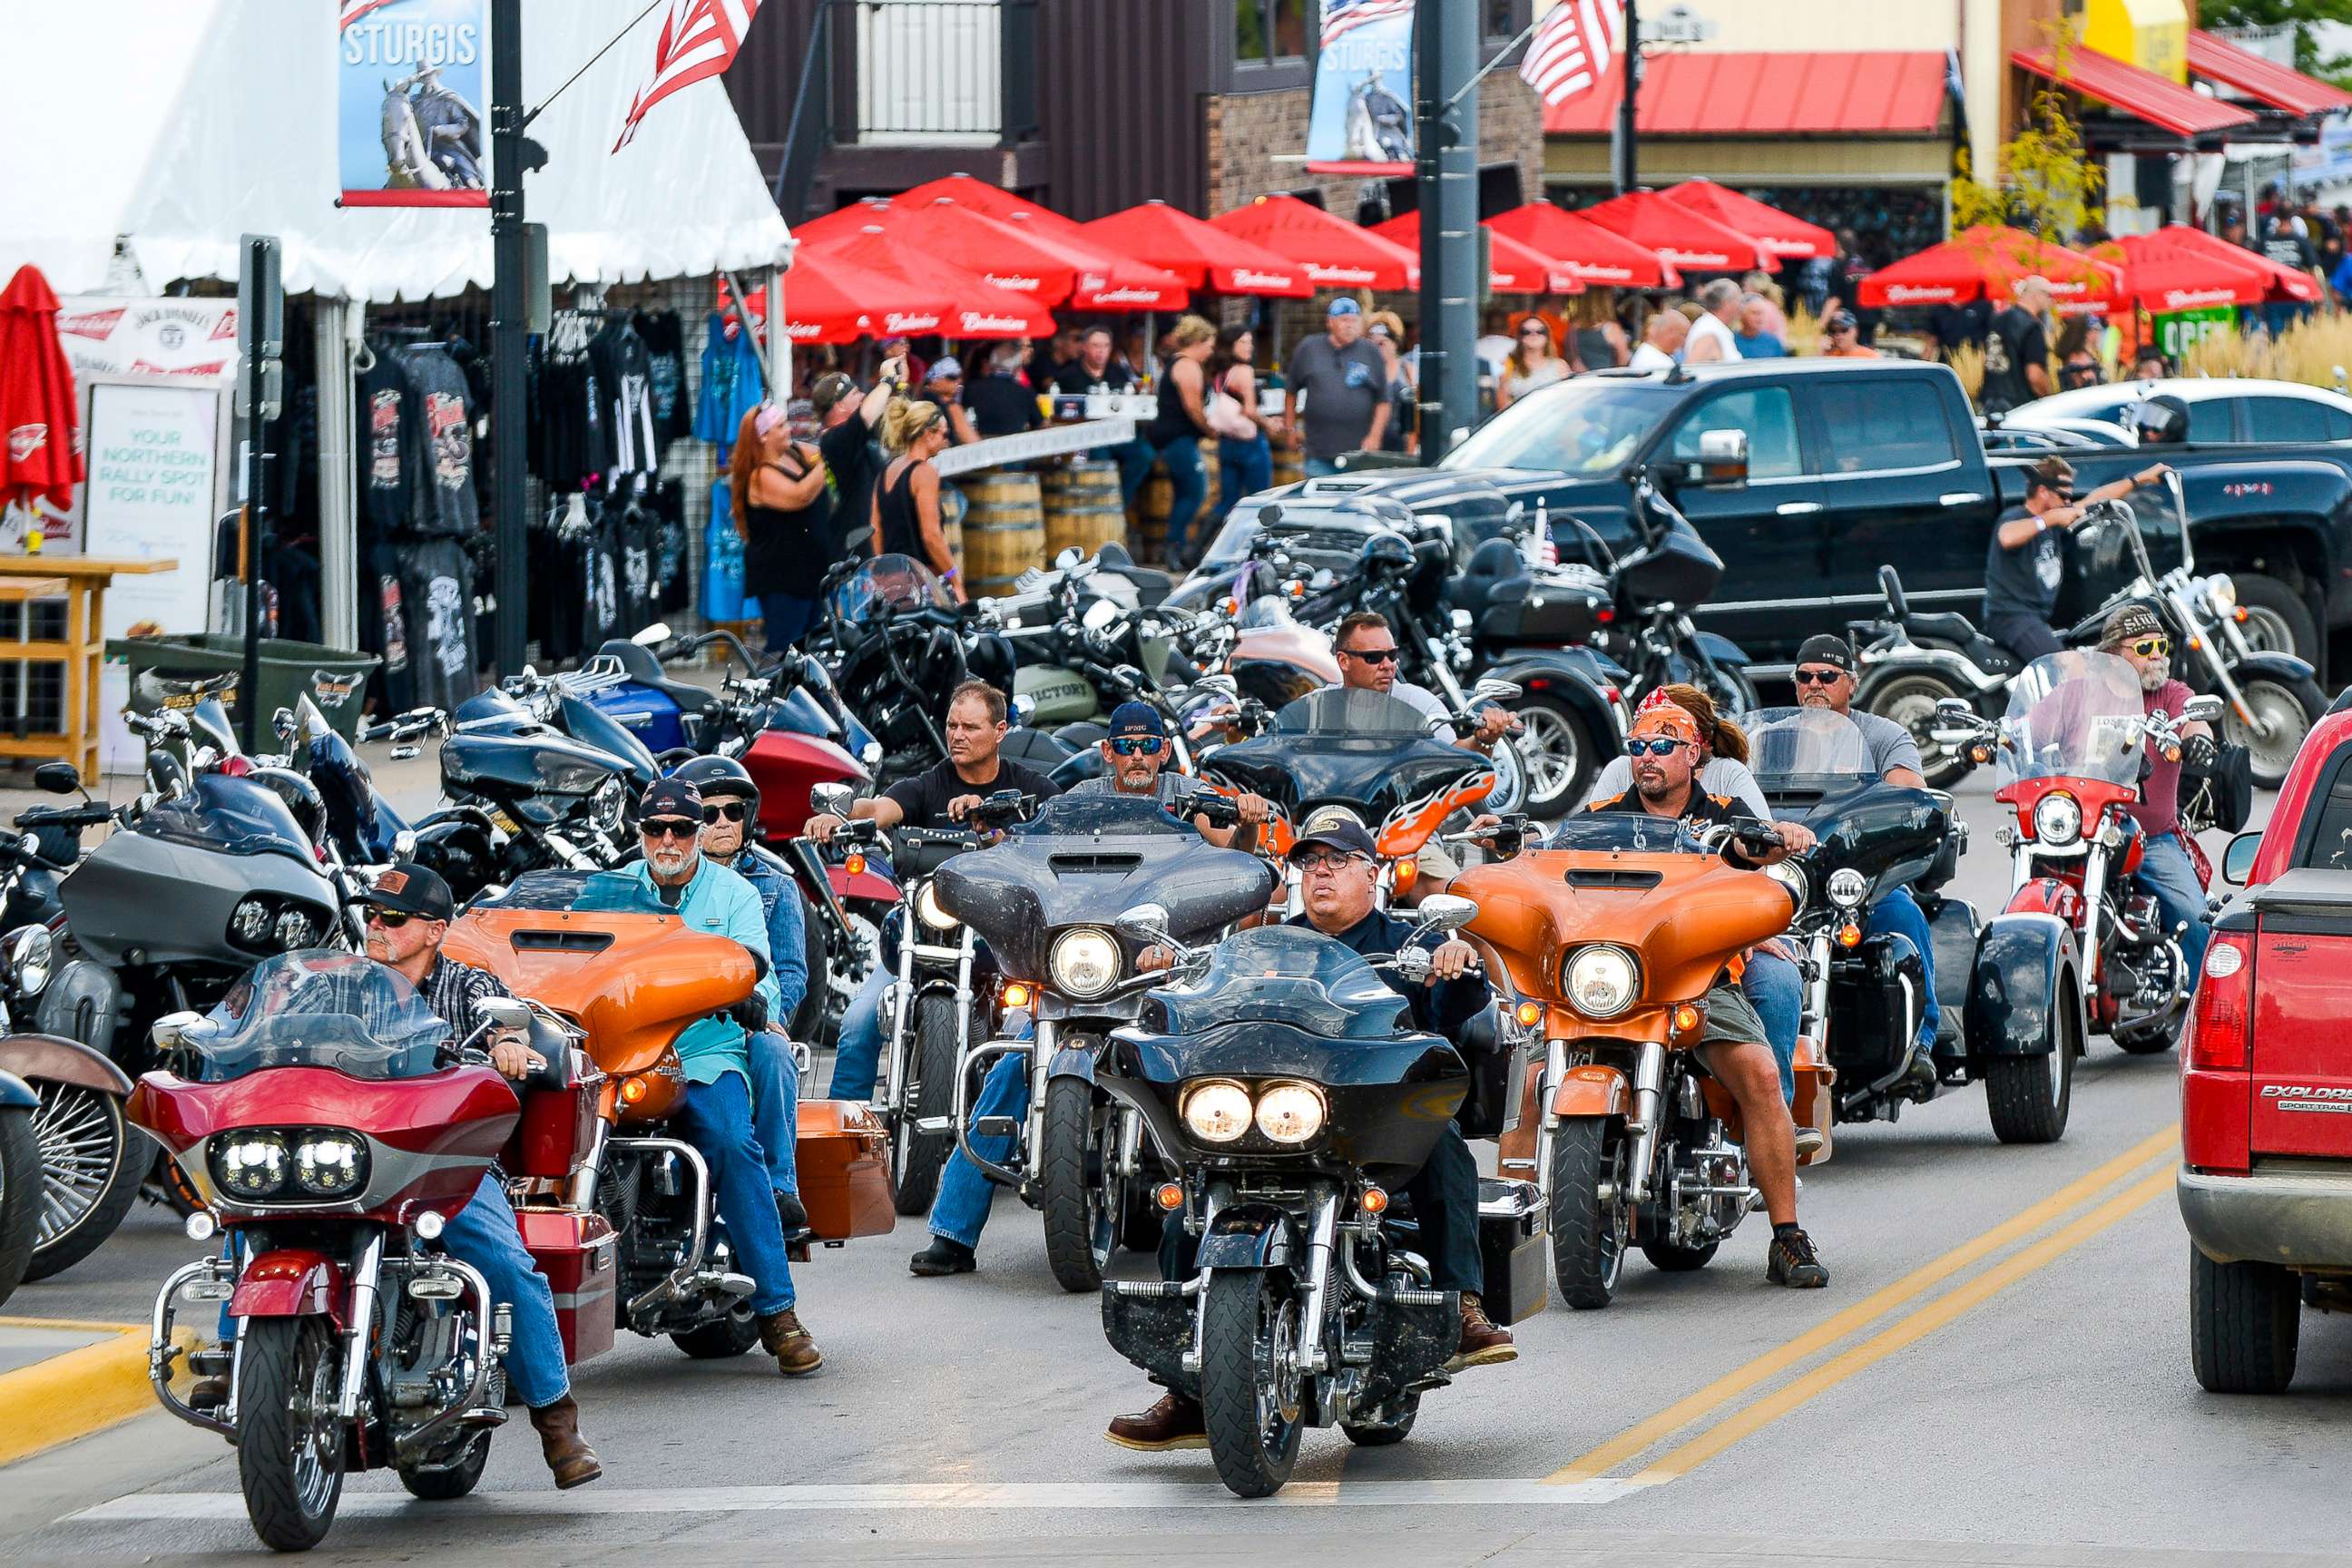 PHOTO: Motorcyclists ride down Main Street a day before the start of the Sturgis Motorcycle Rally, Aug. 6, 2020 in Sturgis, S.D.